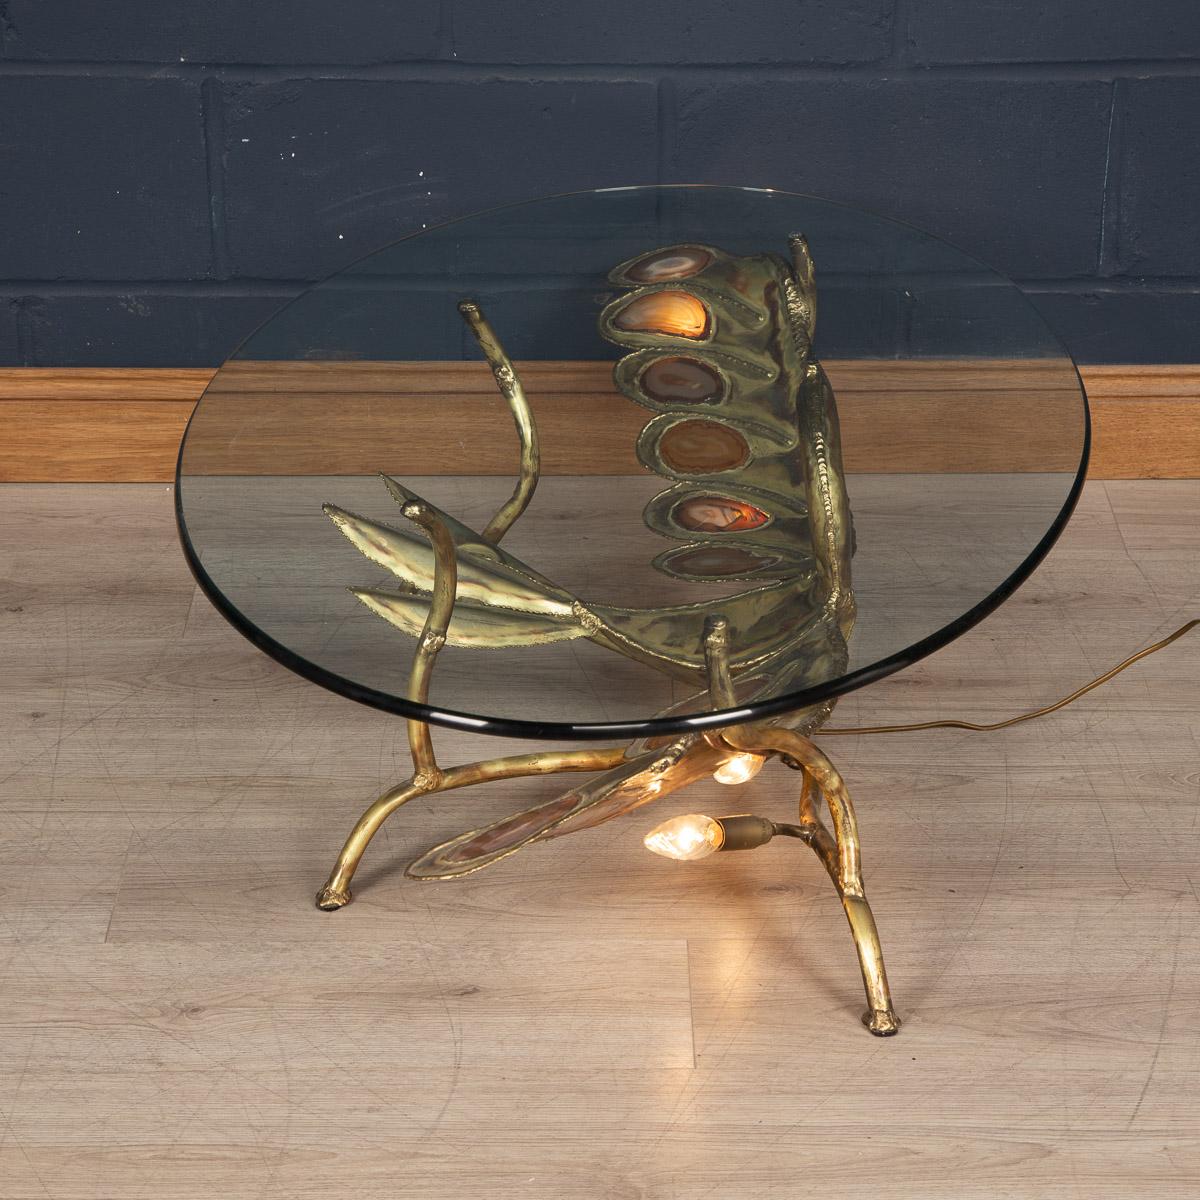 A stunning and striking sculptural coffee table or side table in the form of a butterfly with its wings outstretched. Hand made by the famous designer of the 1970s Henri Fernandez, this item is made largely from quality brass and agate slices, the